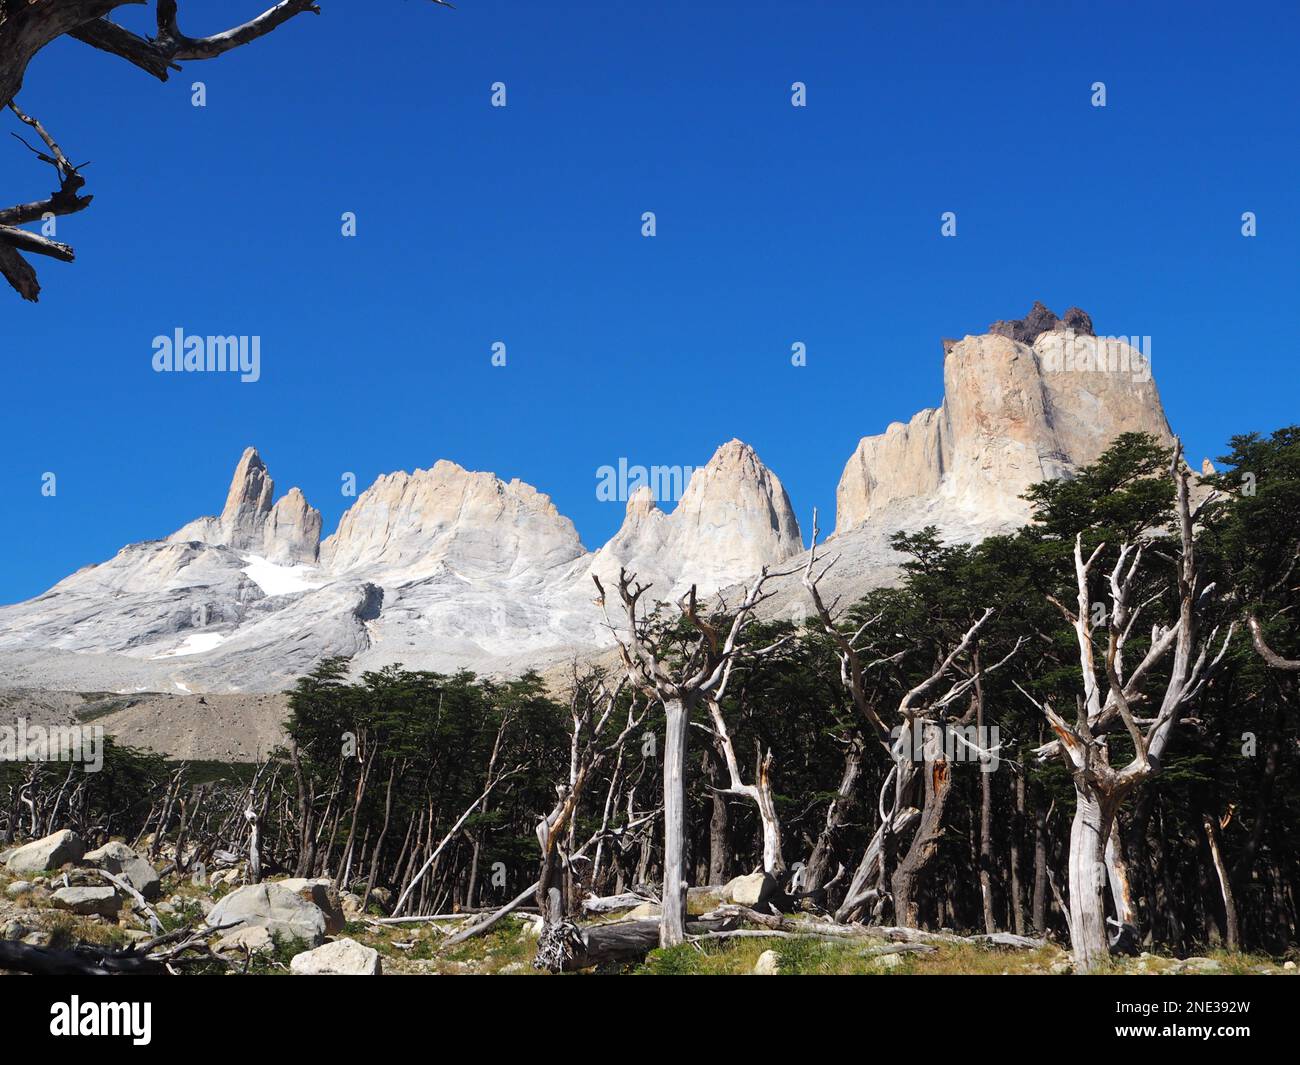 The Horns, Torres del Paine, Chile Stock Photo